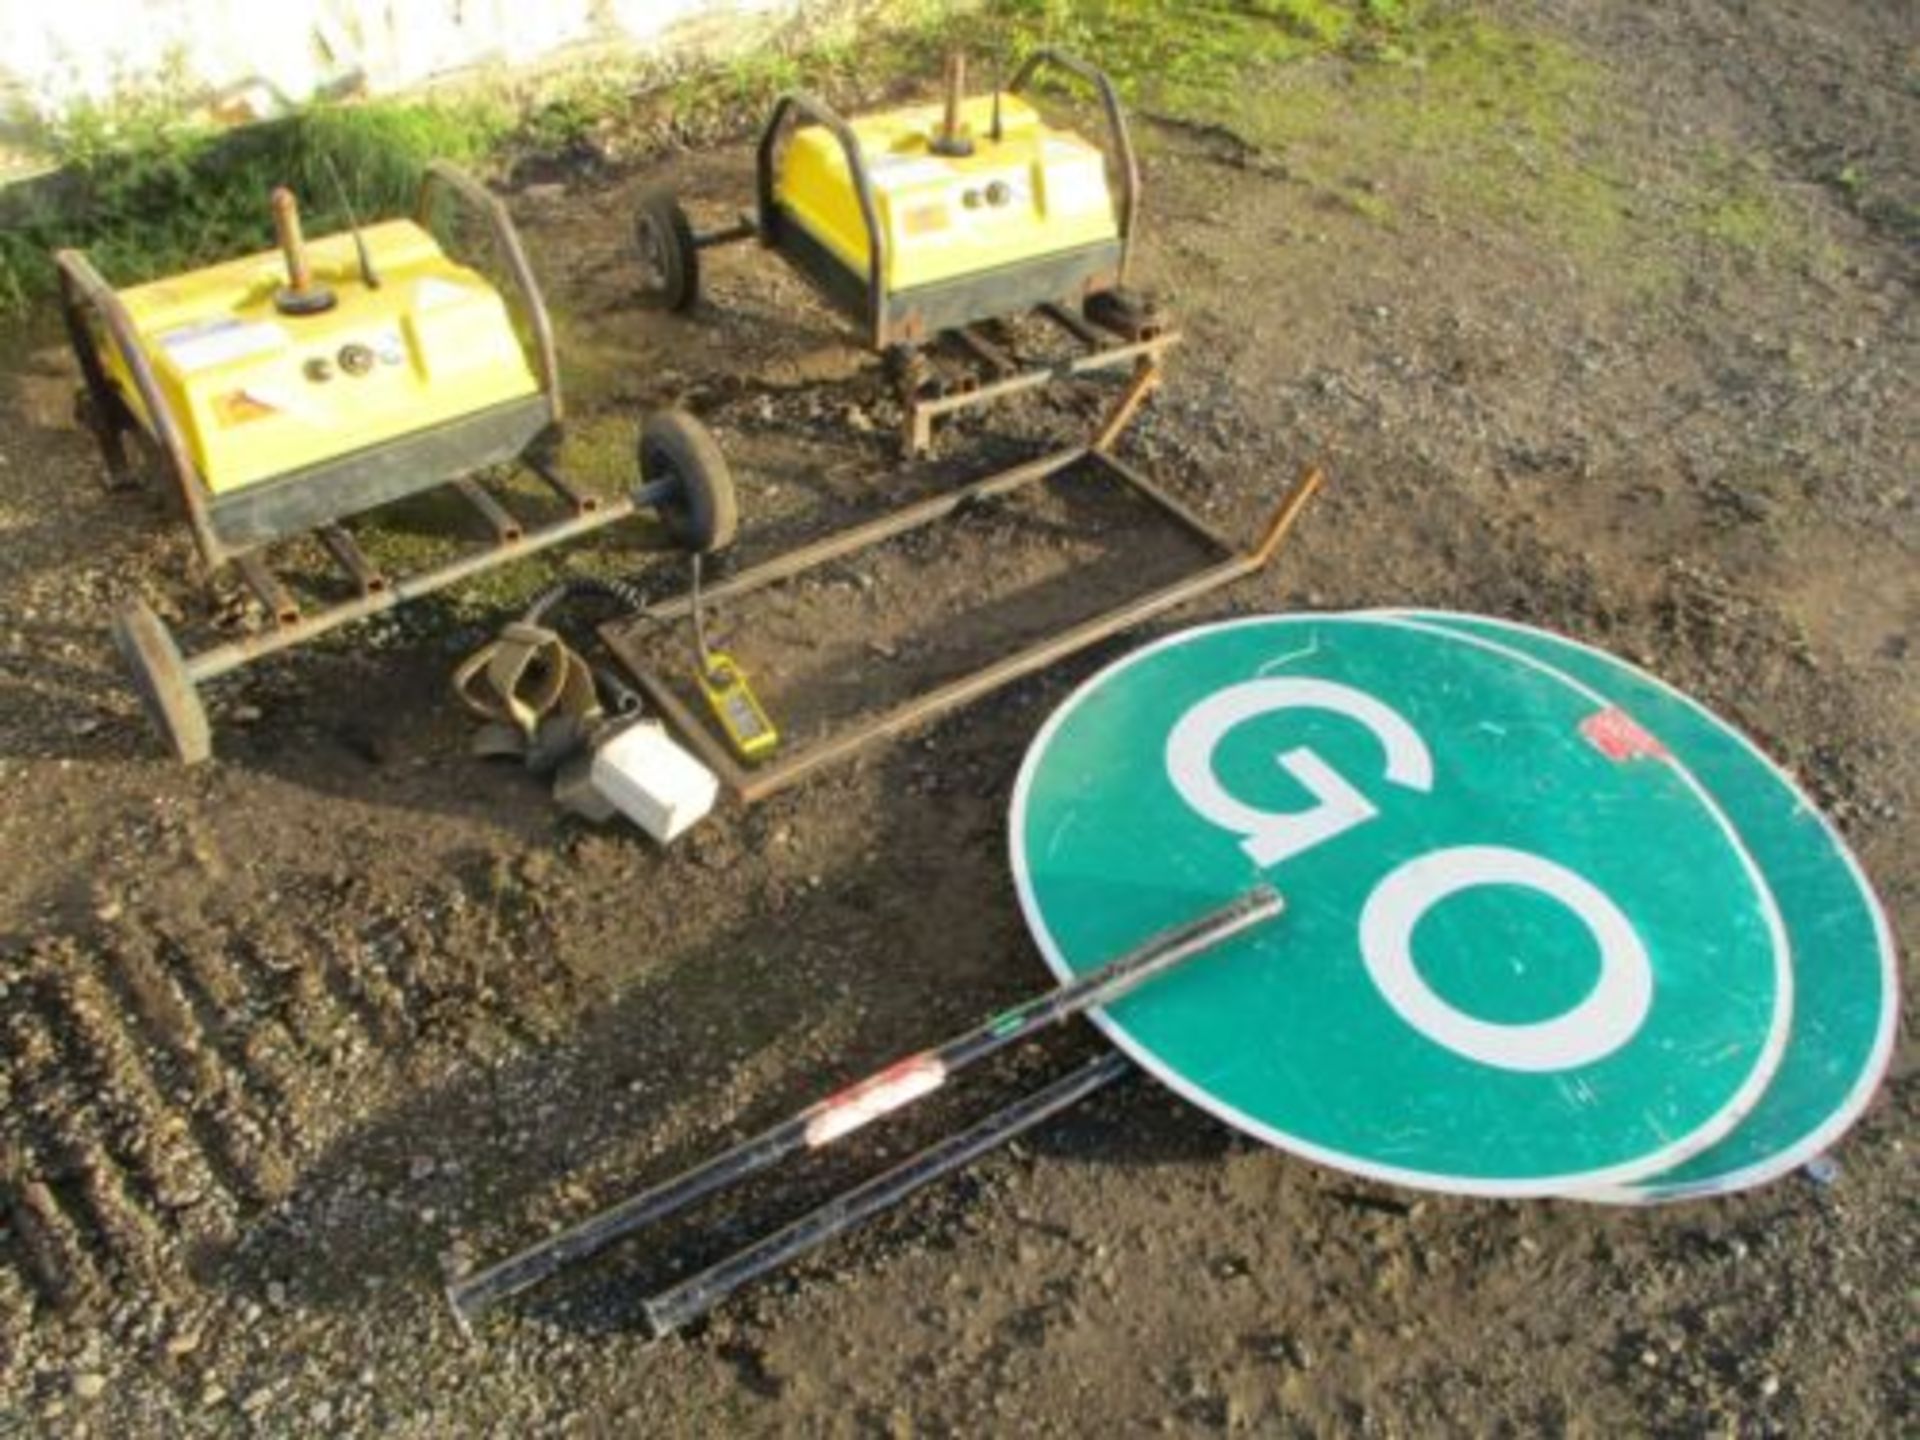 PIKE ROBOSIGN STOP GO BOARDS TRAFFIC LIGHTS SIGN LIGHT BATTERY 2 WAY - Image 4 of 4